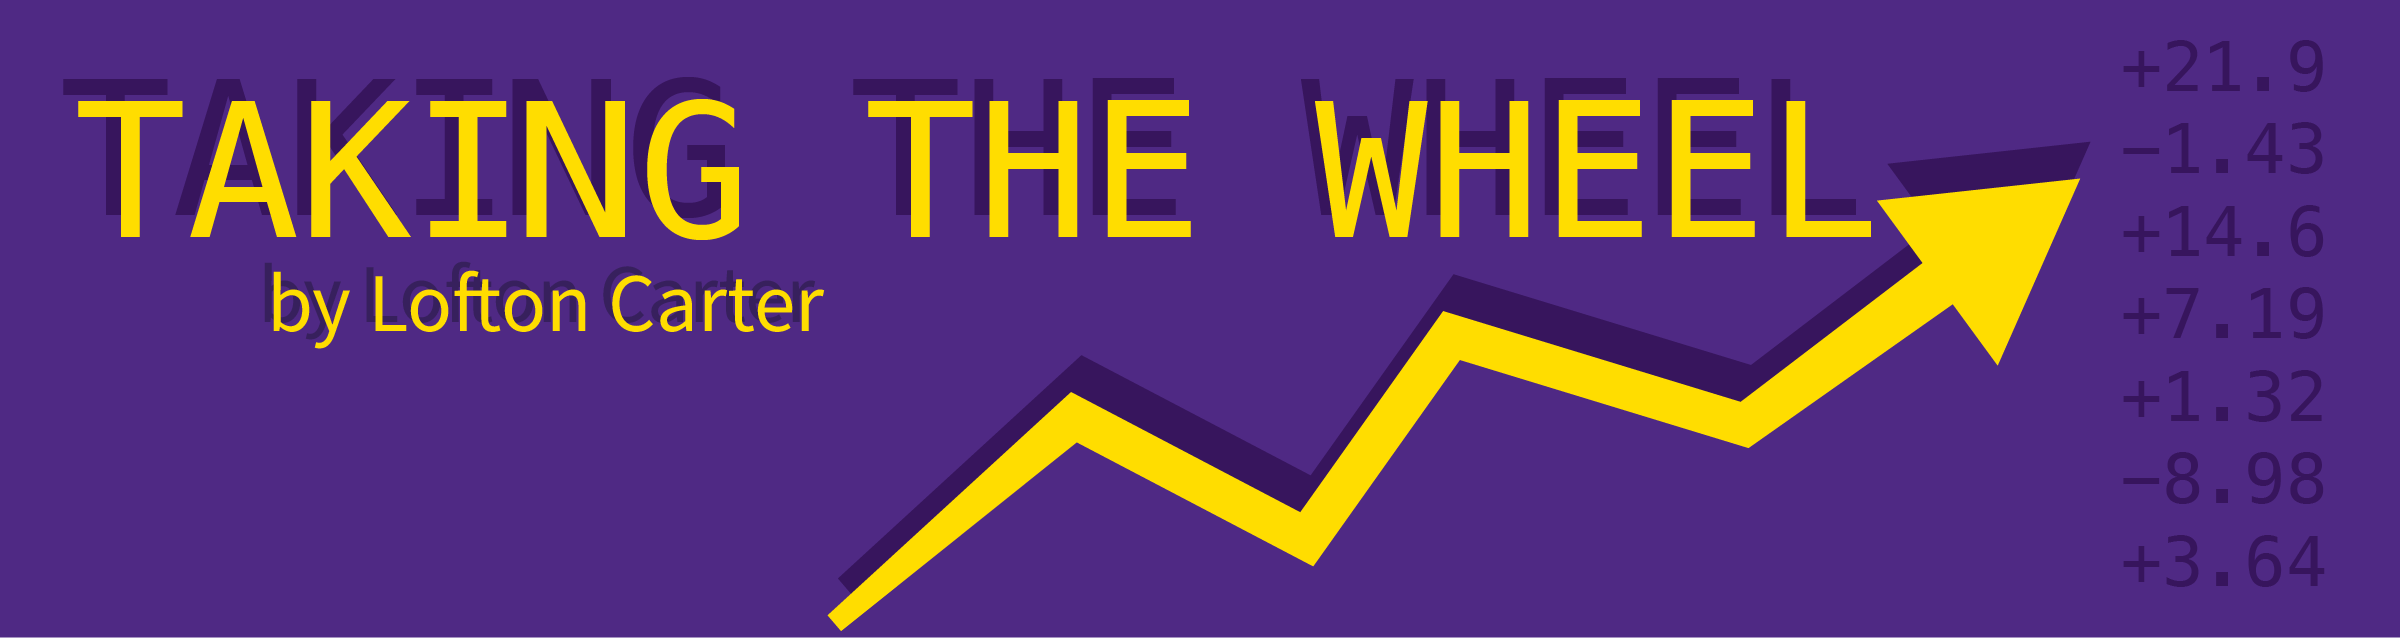 A purple graphic with a stock indicator that reads "Taking the Wheel by Lofton Carter"